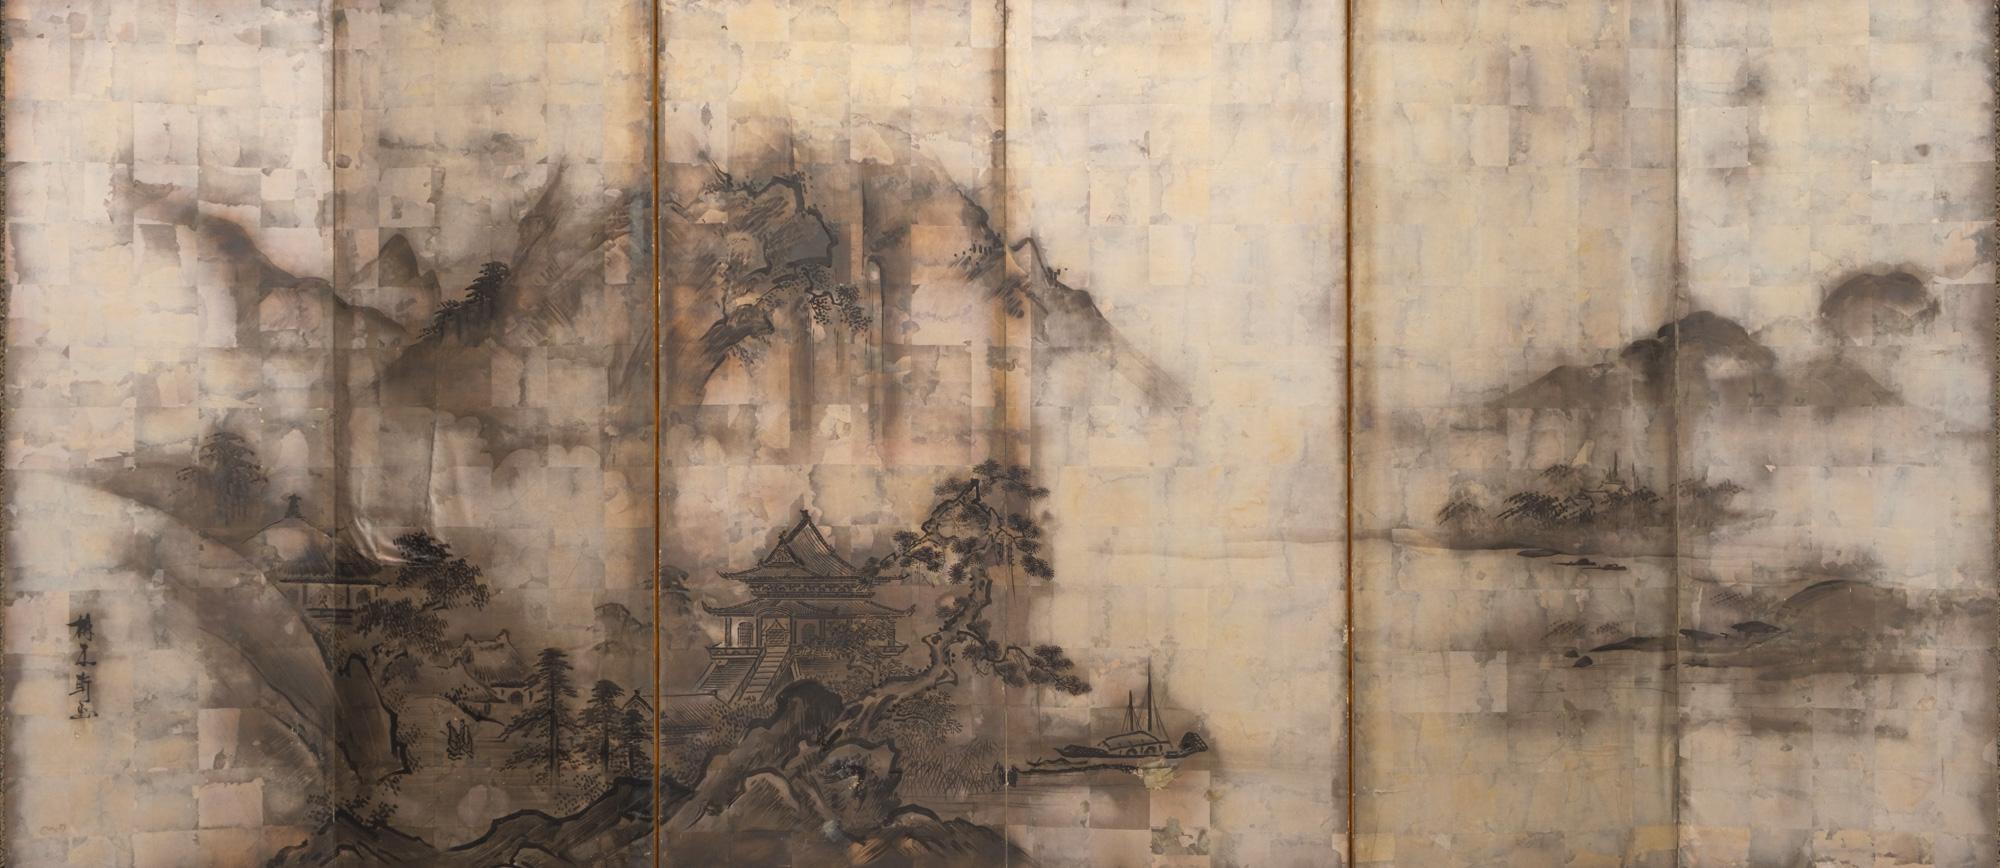 A captivating large six-panel byôbu (folding screen) with a refined Nanga School-style painting of a peaceful mountain landscape along a river. A large Chinese pavilion sits at the base of a tall towering cliff, next to a large curving pine tree